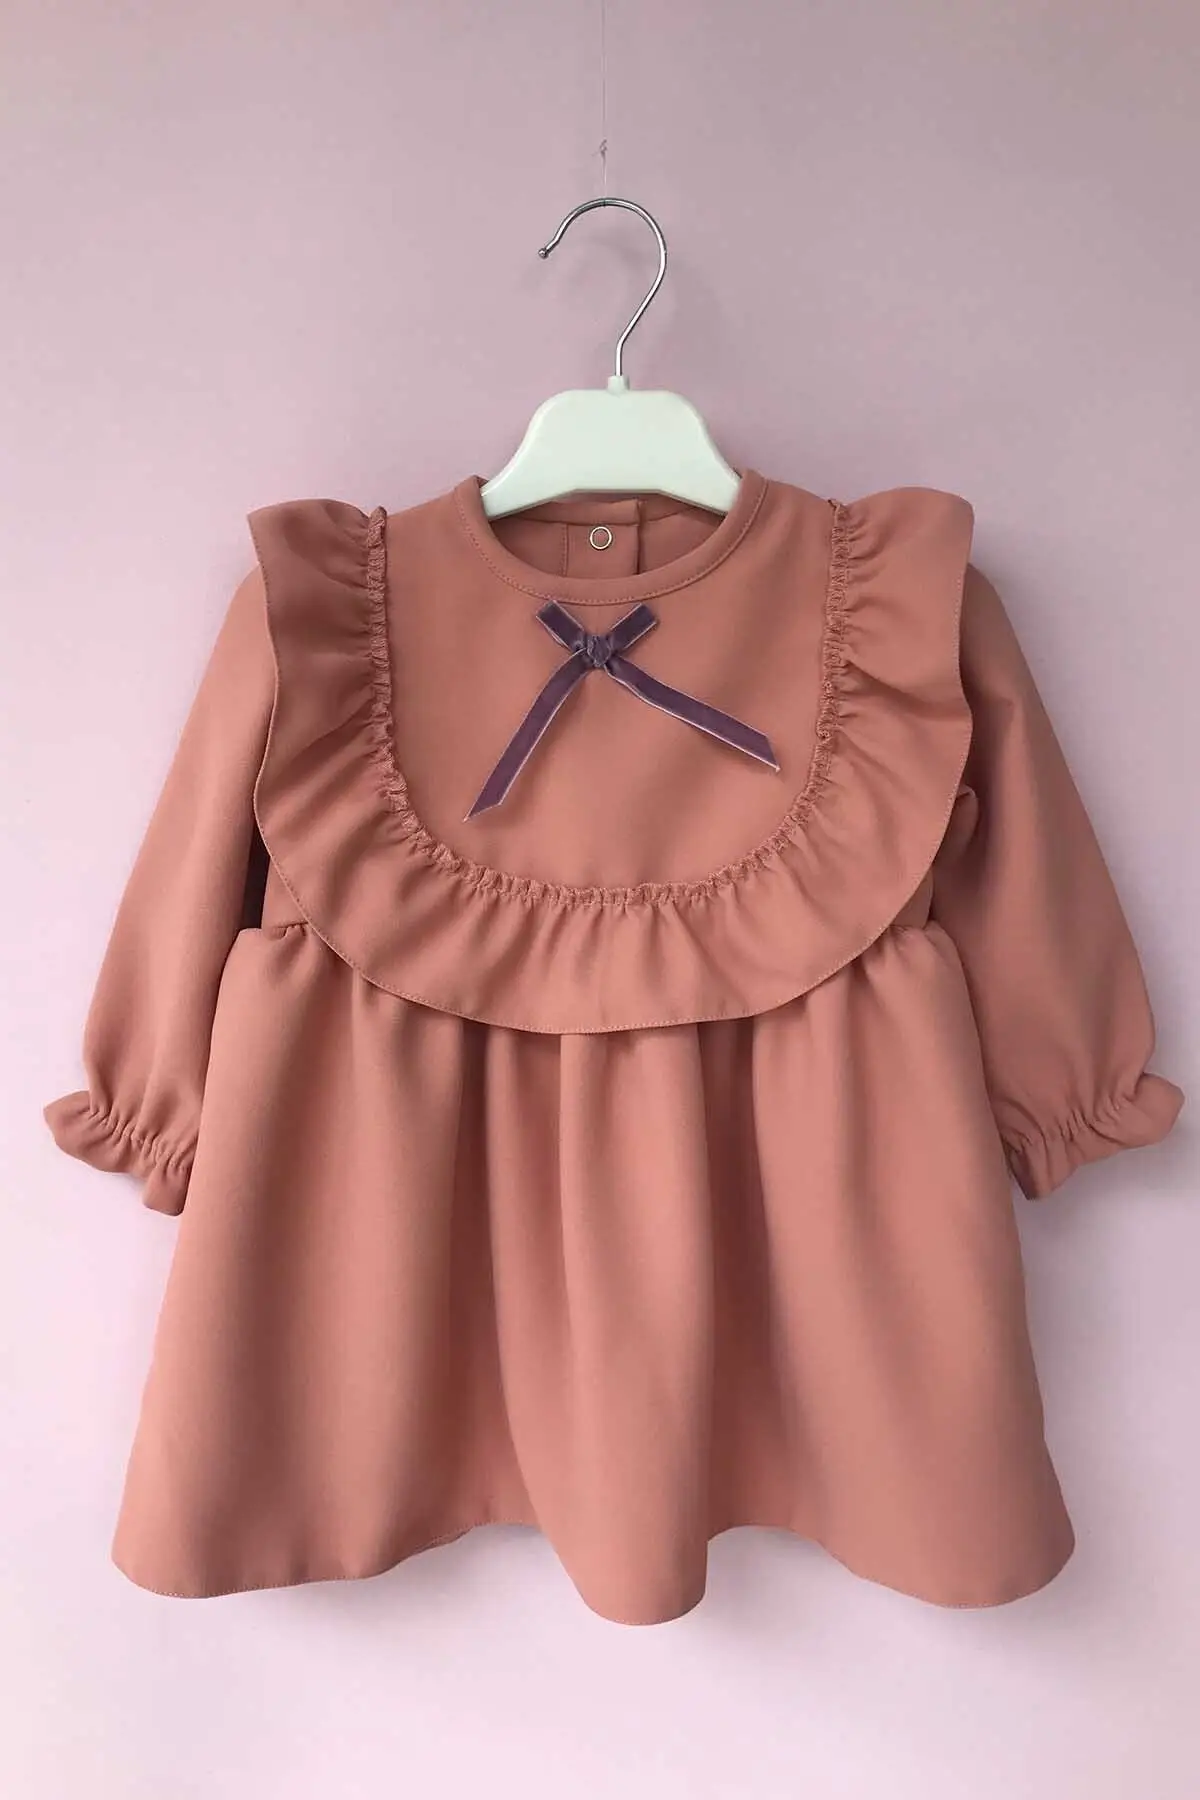 Frilly And Ribbon Detail Salmon Crepe Female Child Dress Special Day Birthday Dresses Pink Clothing